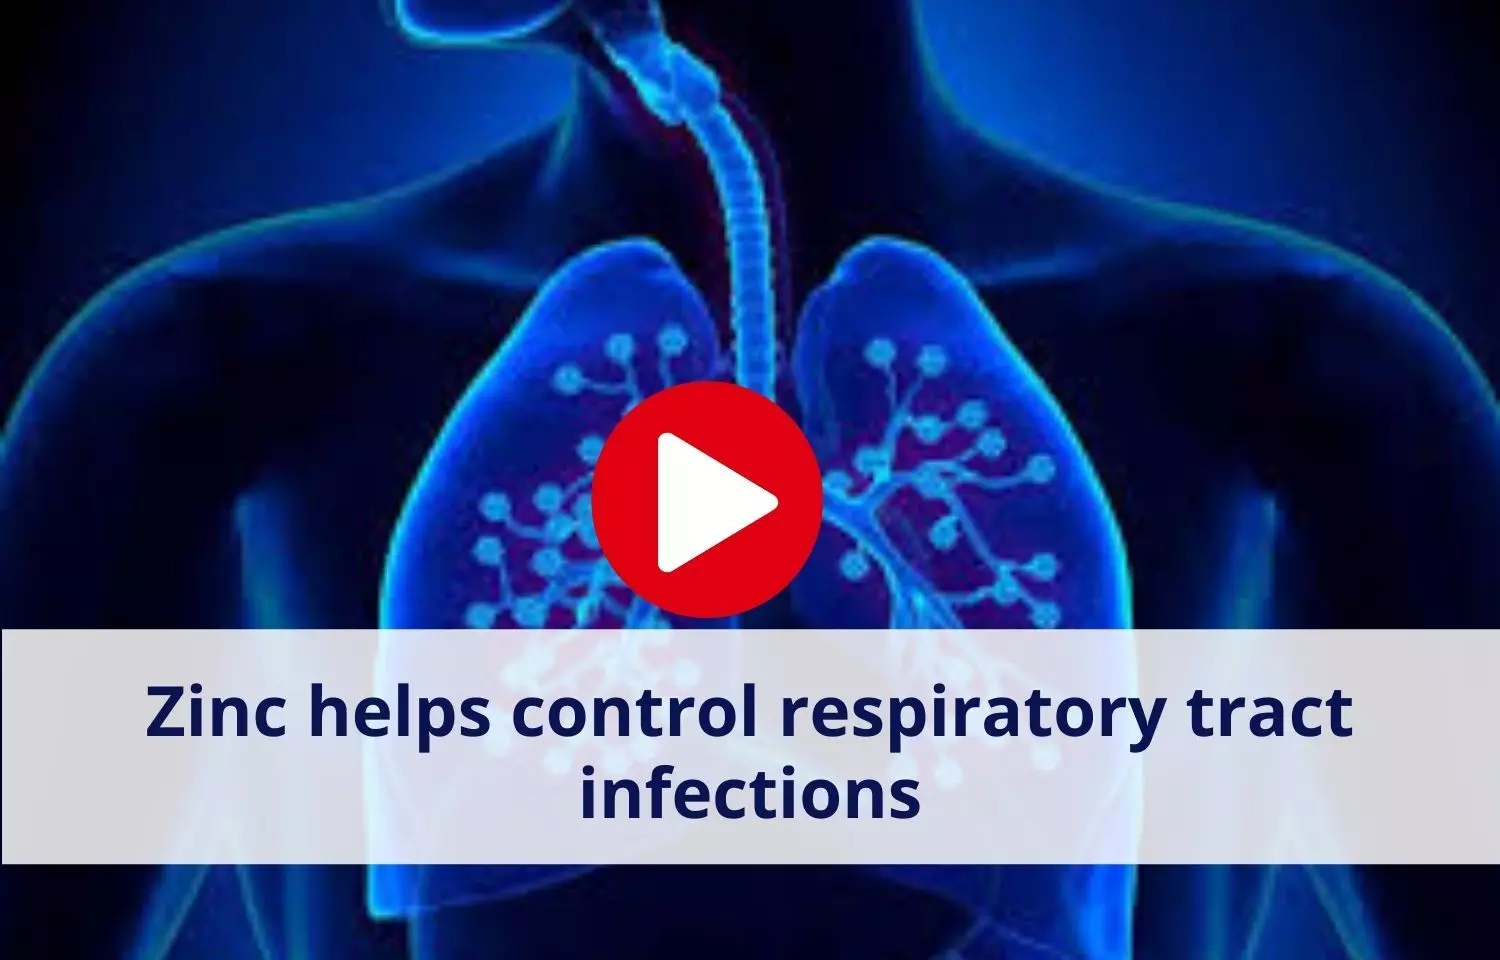 Zinc helps control respiratory tract infections